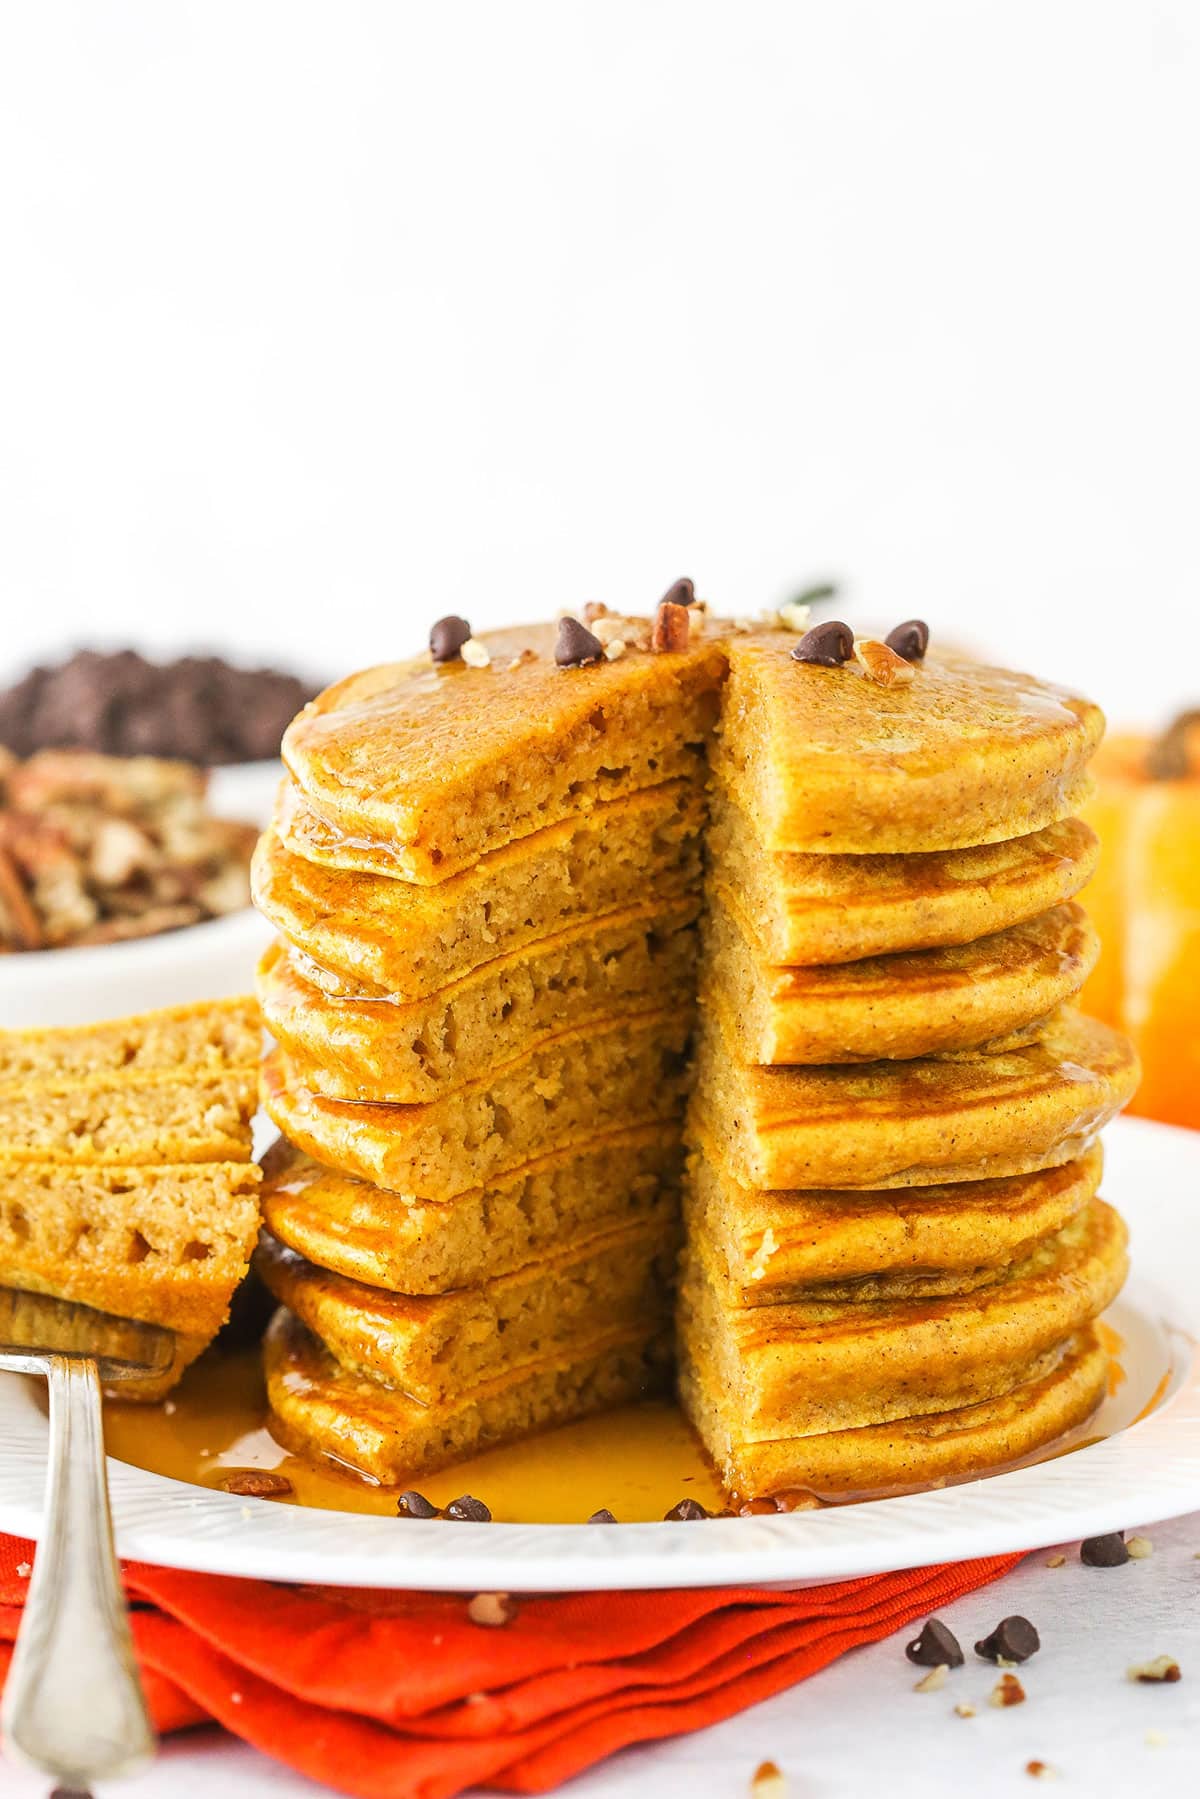 A Stack of the Fluffiest Homemade Pancakes Made From Scratch